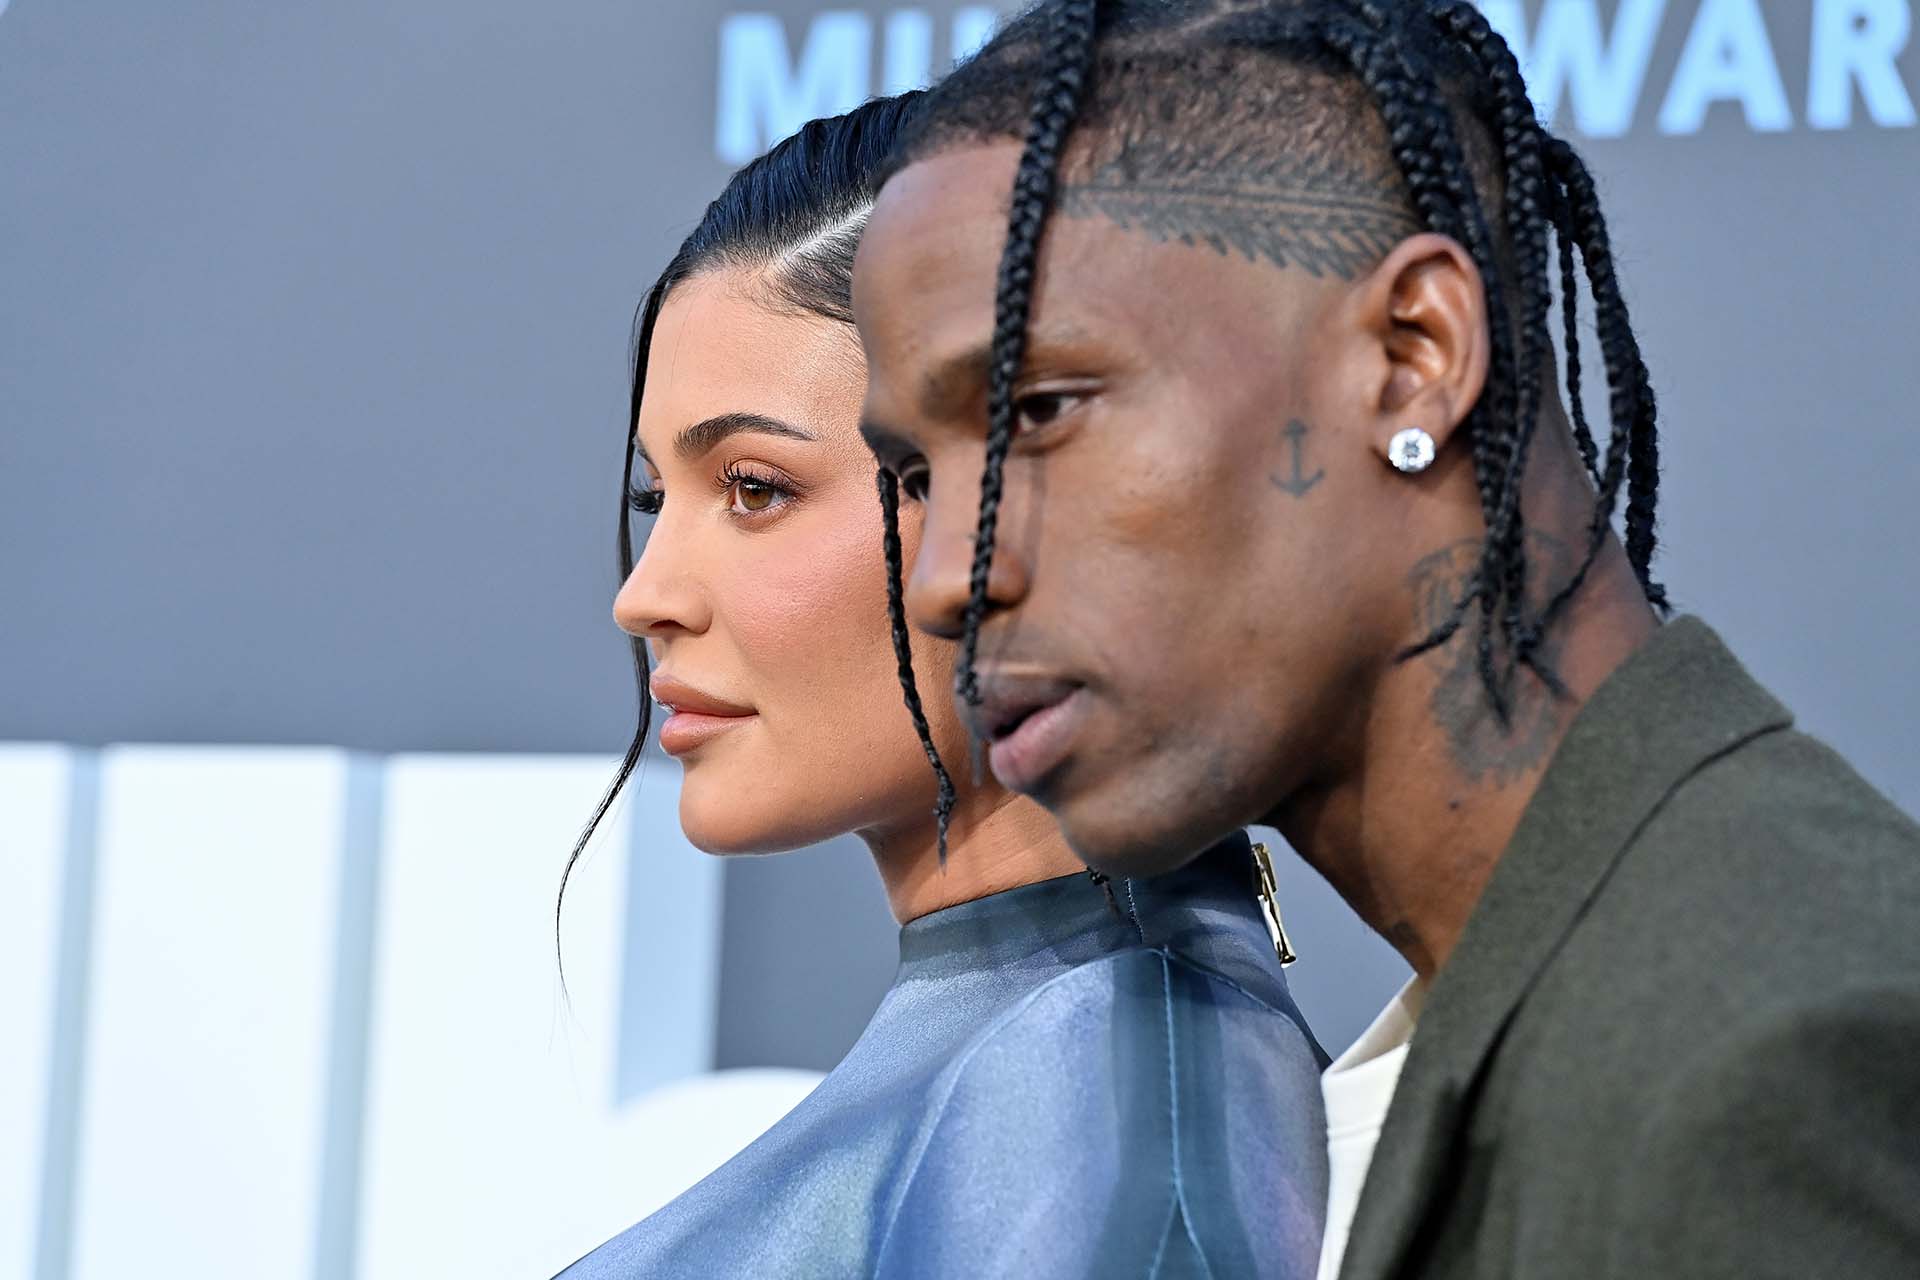 Kylie Jenner and Travis Scott were seen together at the 2022 Billboard Music Awards event in Las Vegas, Nevada (Axelle/Bauer-Griffin/FilmMagic)